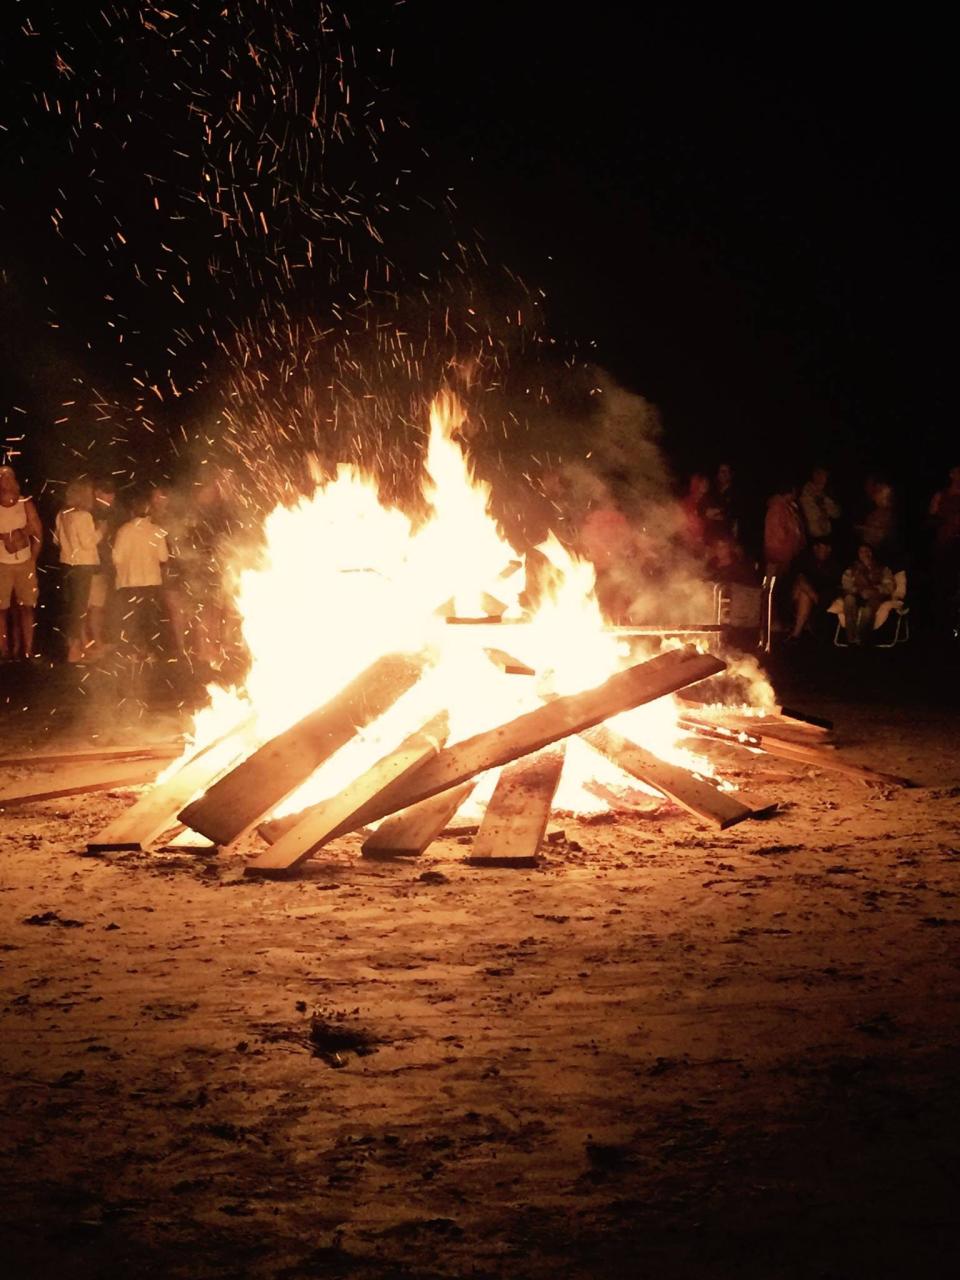 The town Parks and Recreation Department is hosting this summer’s Beach Bonfire on Sept. 3.